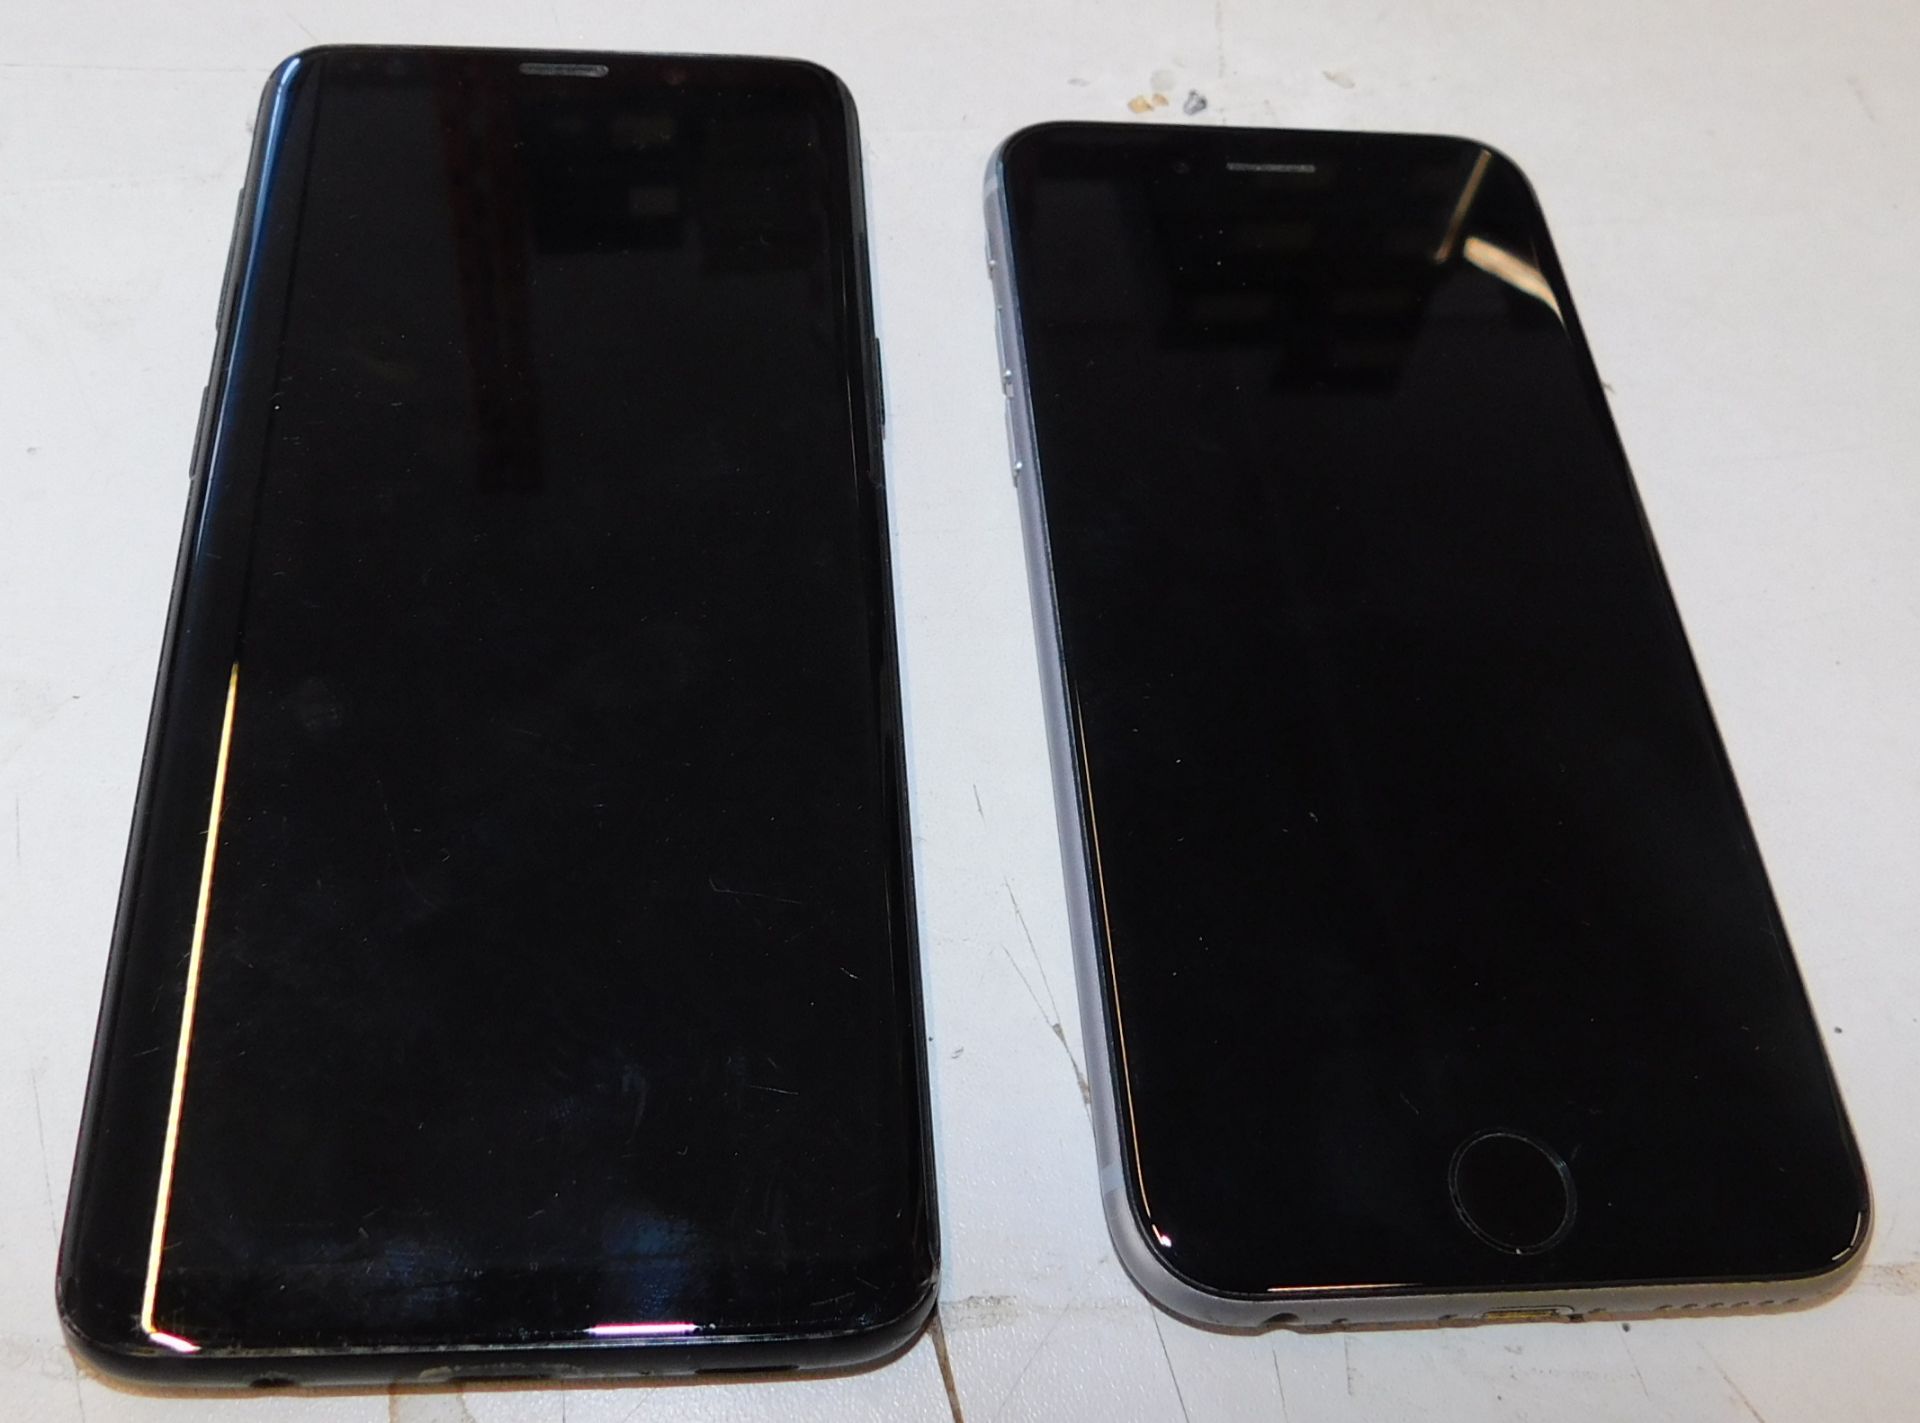 Samsung Galaxy S4 & Apple iPhone 6s (Location: Stockport. Please Refer to General Notes)